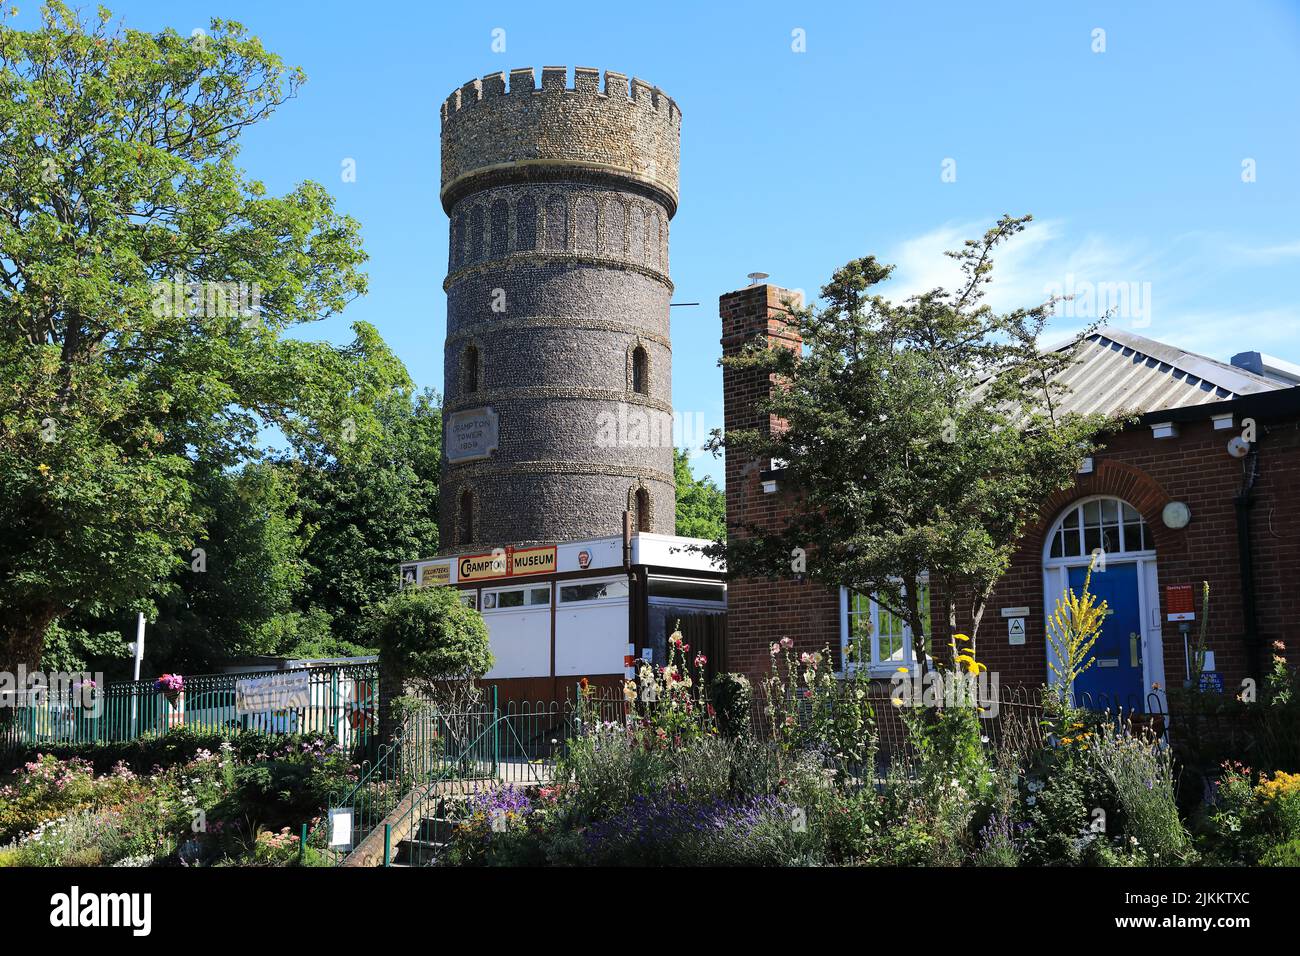 Crampton Tower, a local history museum, for rail & train exhibits and models in a historic water supply tower, on the Broadway, Broadstairs, Kent Stock Photo